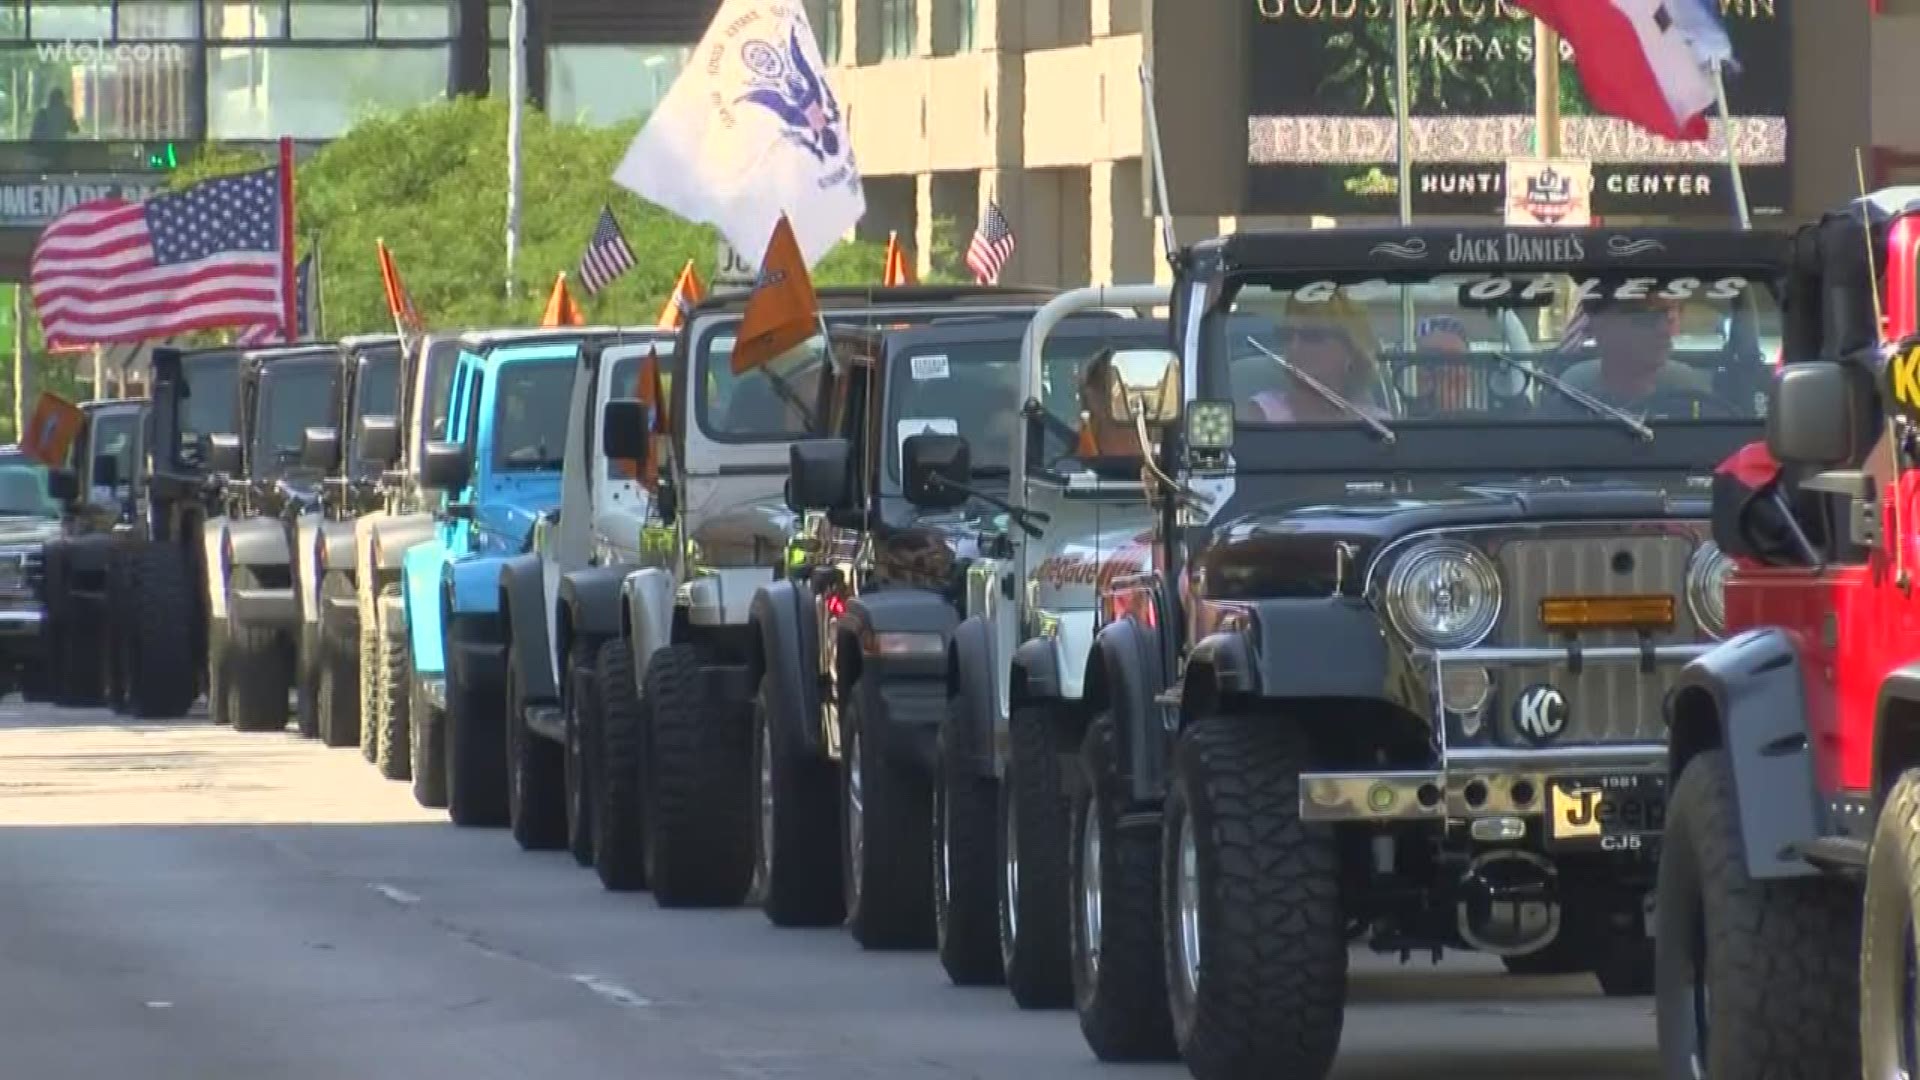 Some Toledo-native employees at the FCA plant in north Toledo are quite excited to show off their products in this year's Jeep celebrations.